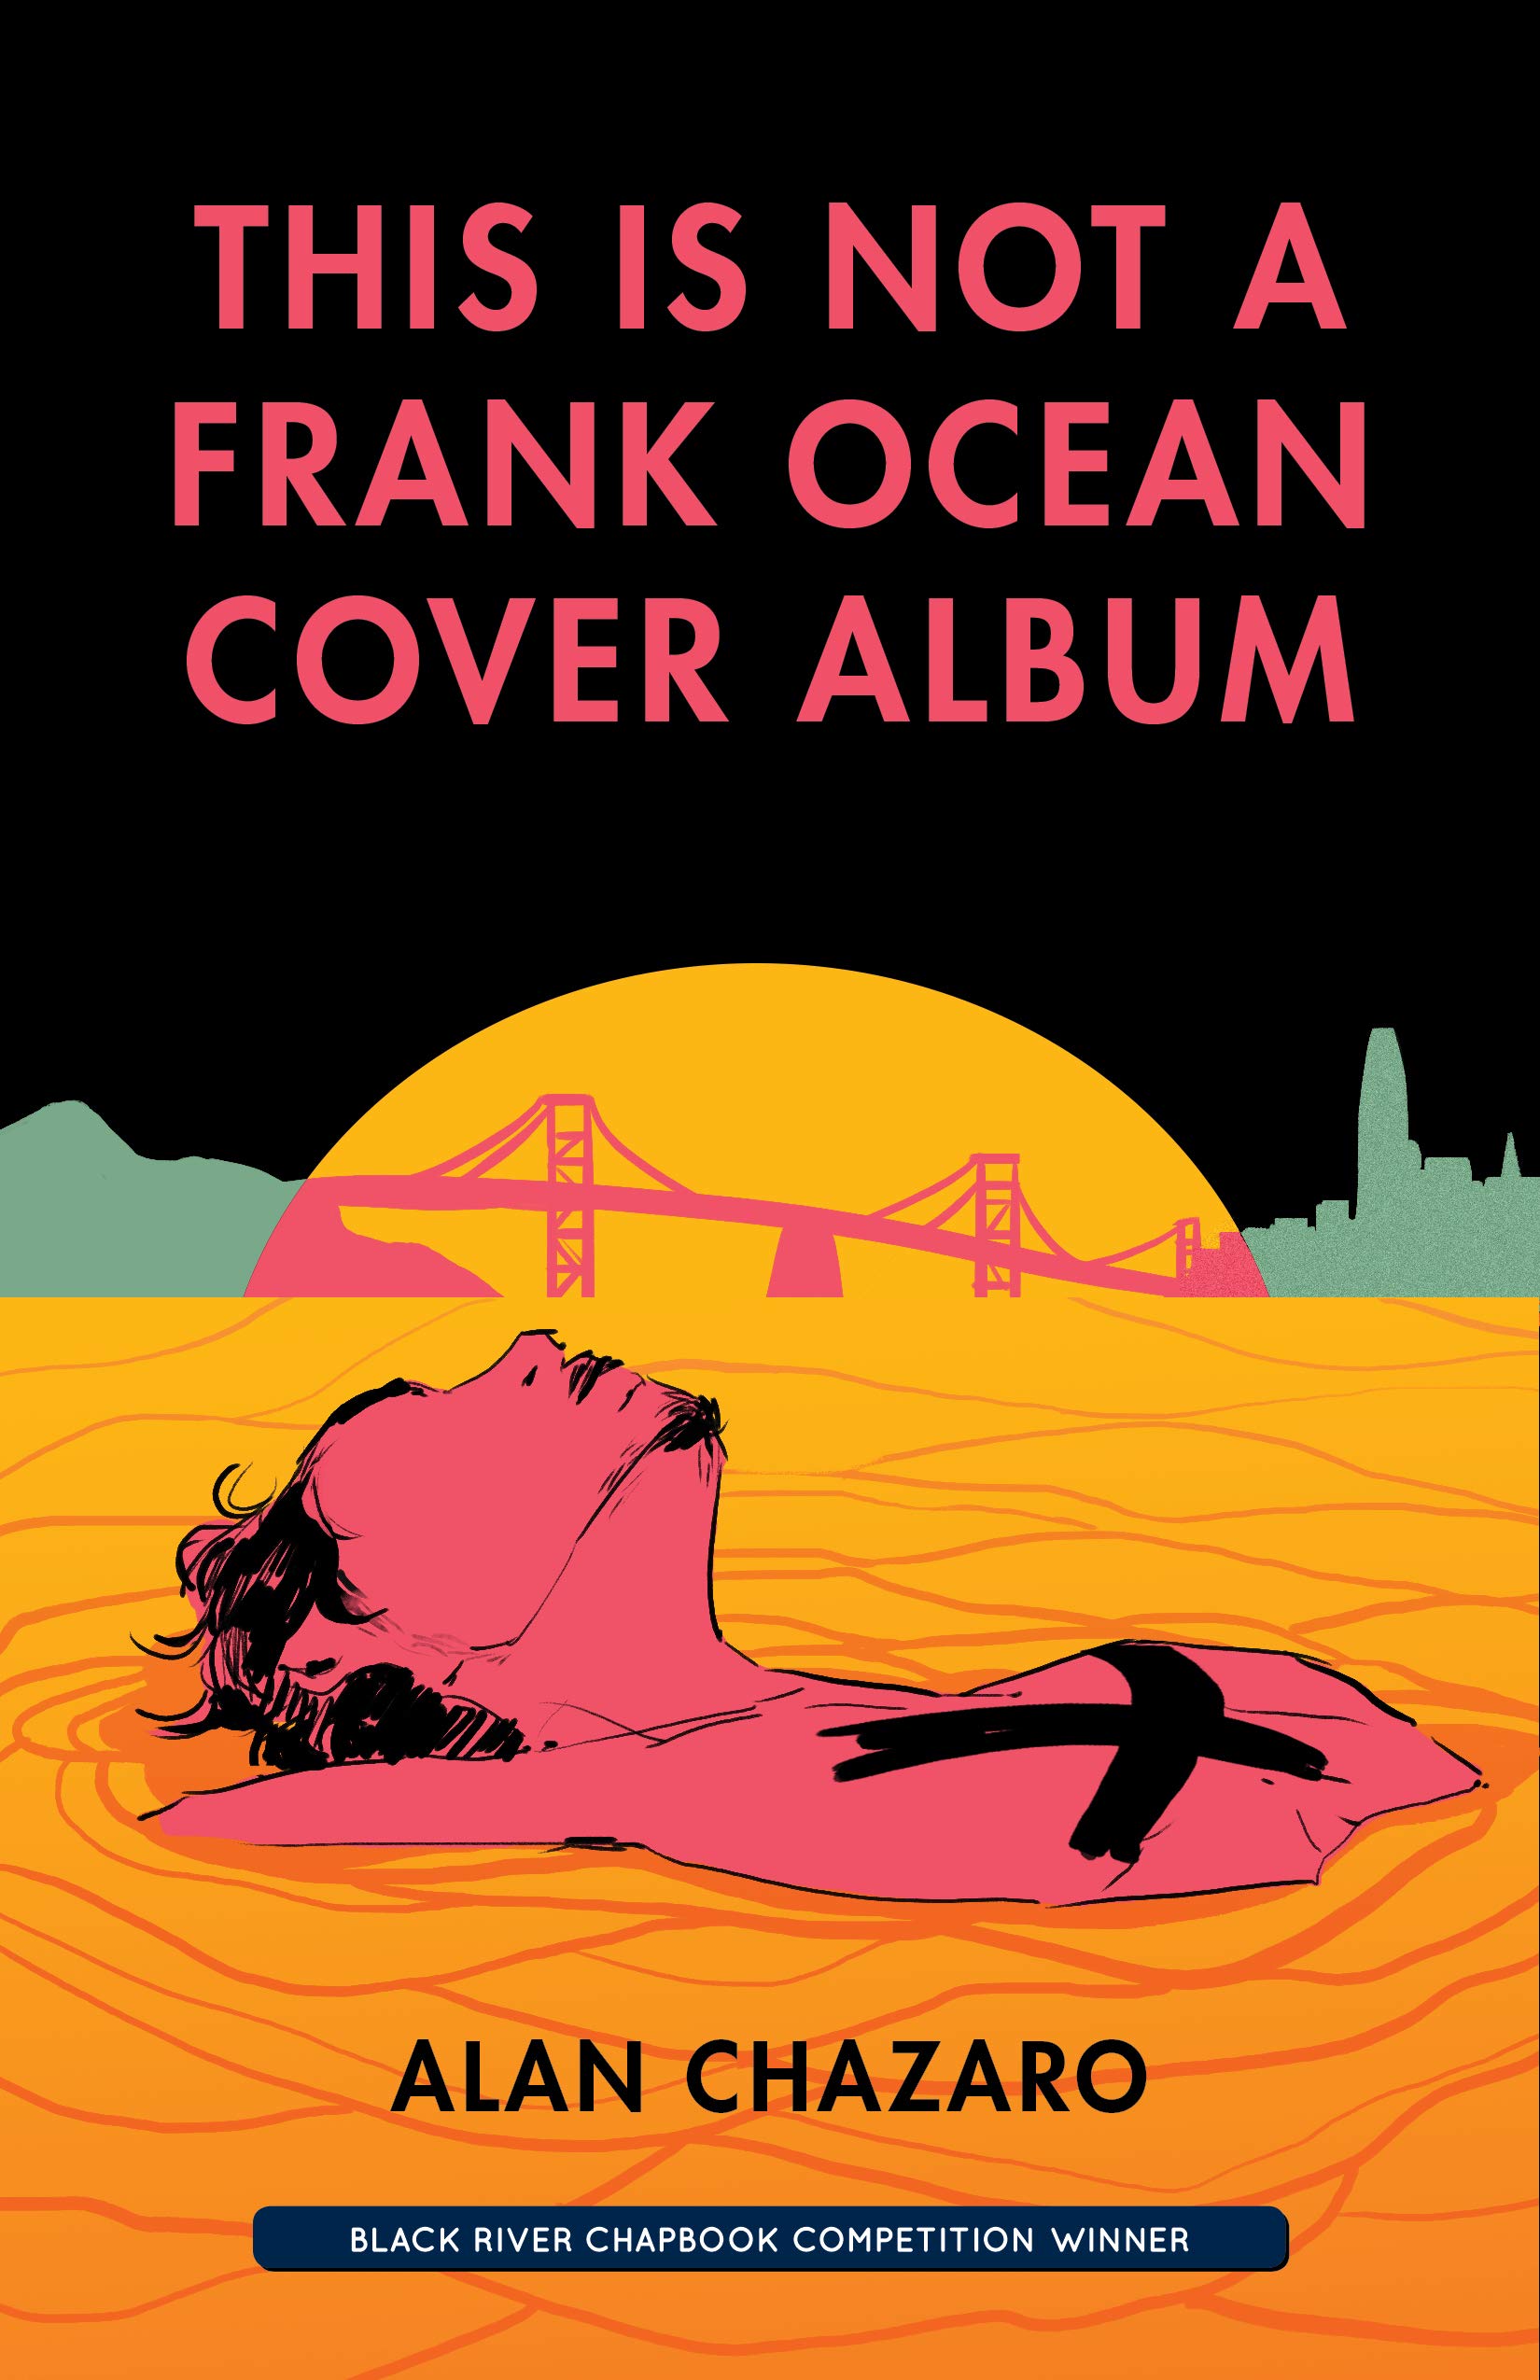 Barrelhouse Reviews: THIS IS NOT A FRANK OCEAN COVER ALBUM by Alan Chazaro